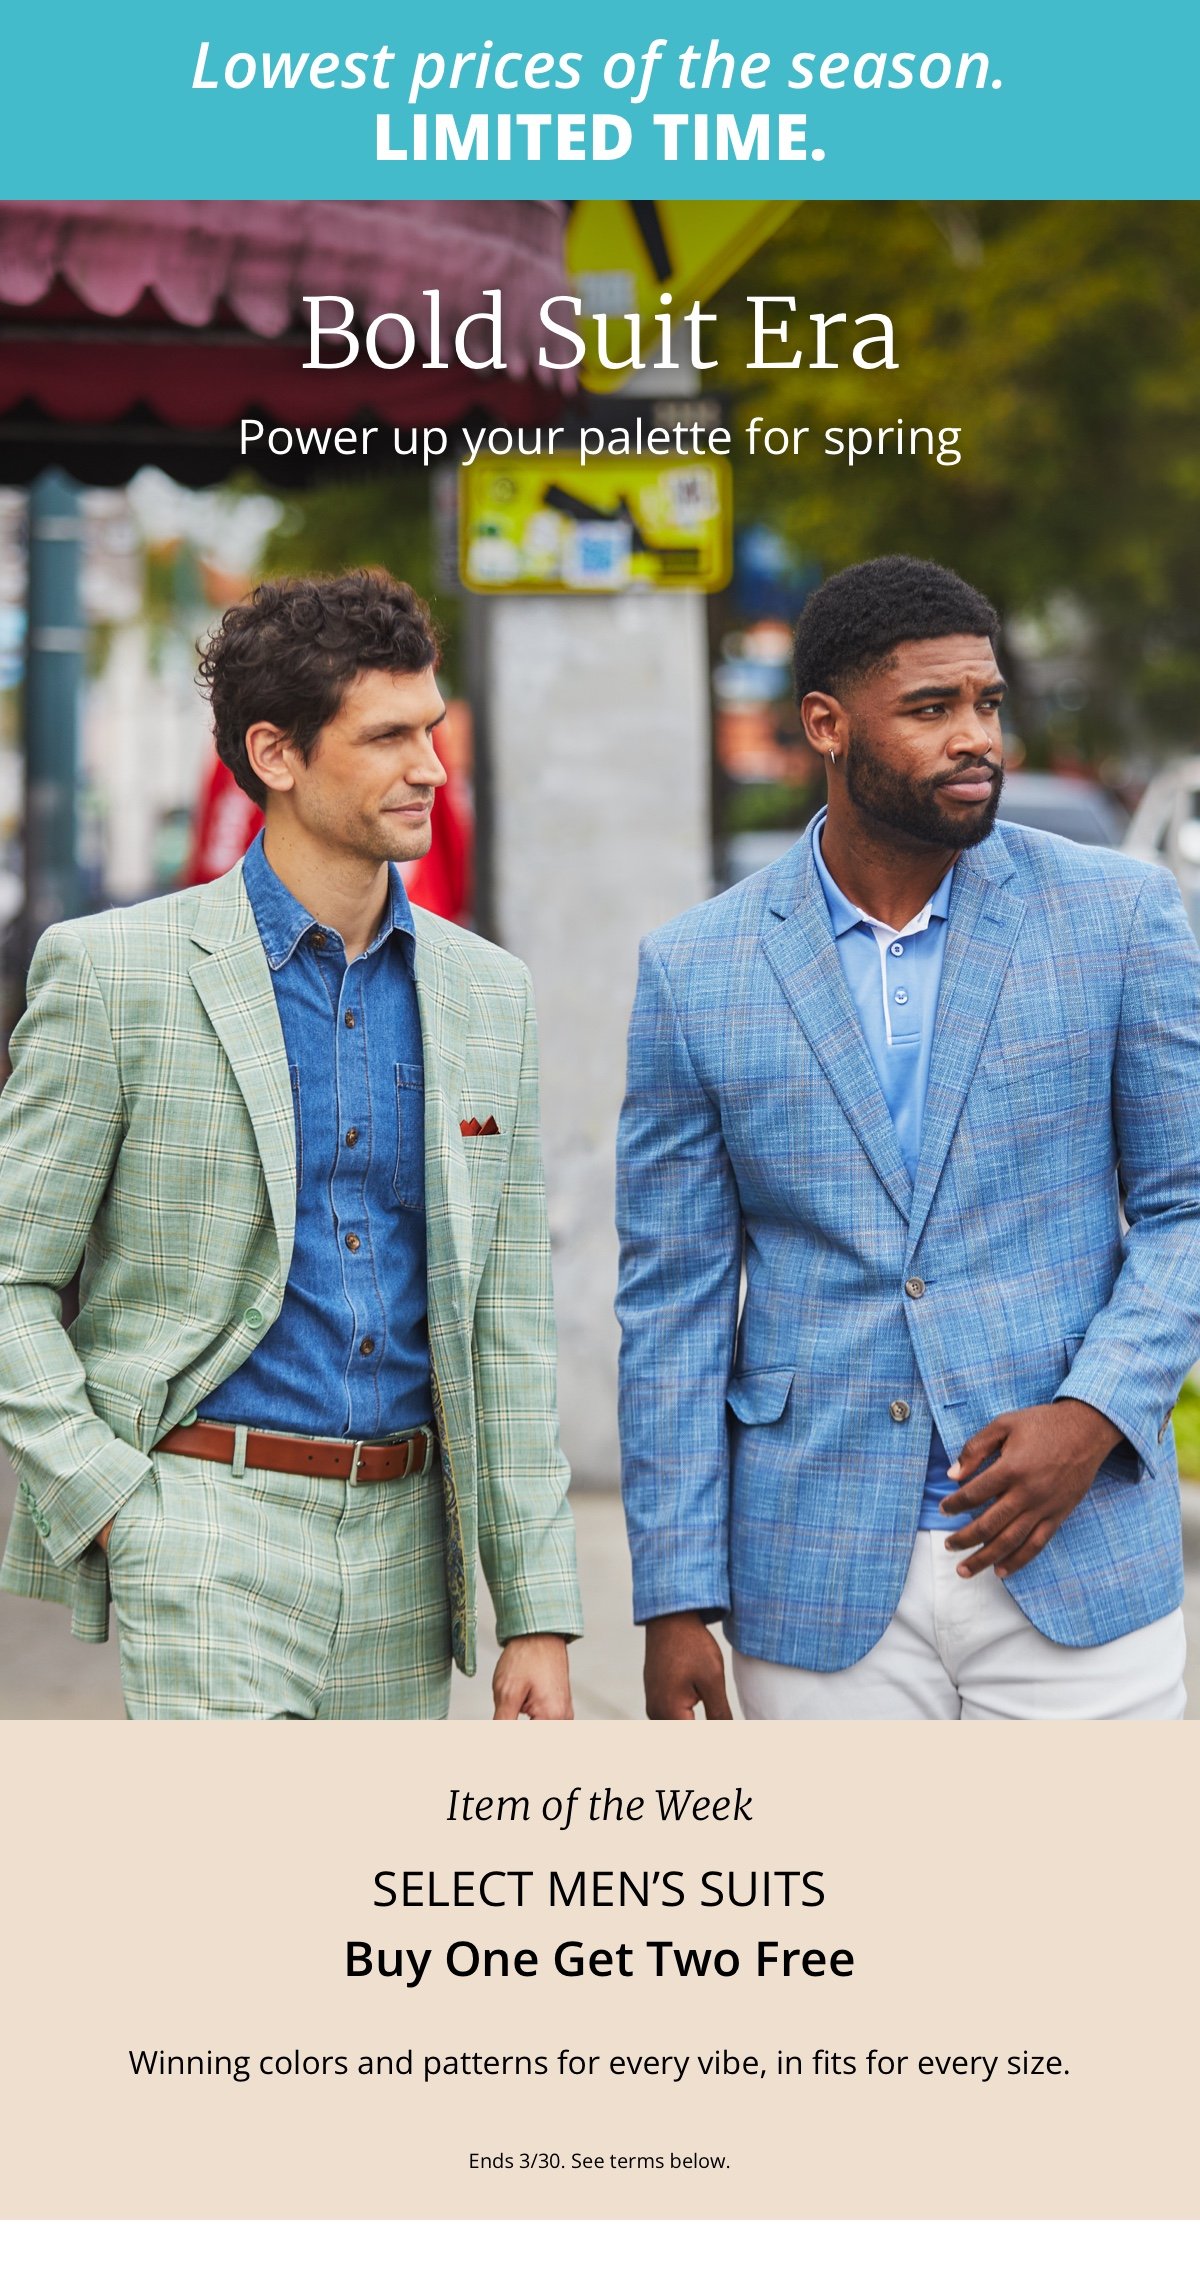 LOWEST PRICES OF THE SEASON. LIMITED TIME.|Bold Suit Era|Power up your palette for spring|Item of the Week|Select Men’s Suits|Buy One Get Two Free|Winning colors and patterns for every vibe, in fits for every size.|Ends 3/30. See terms below. 